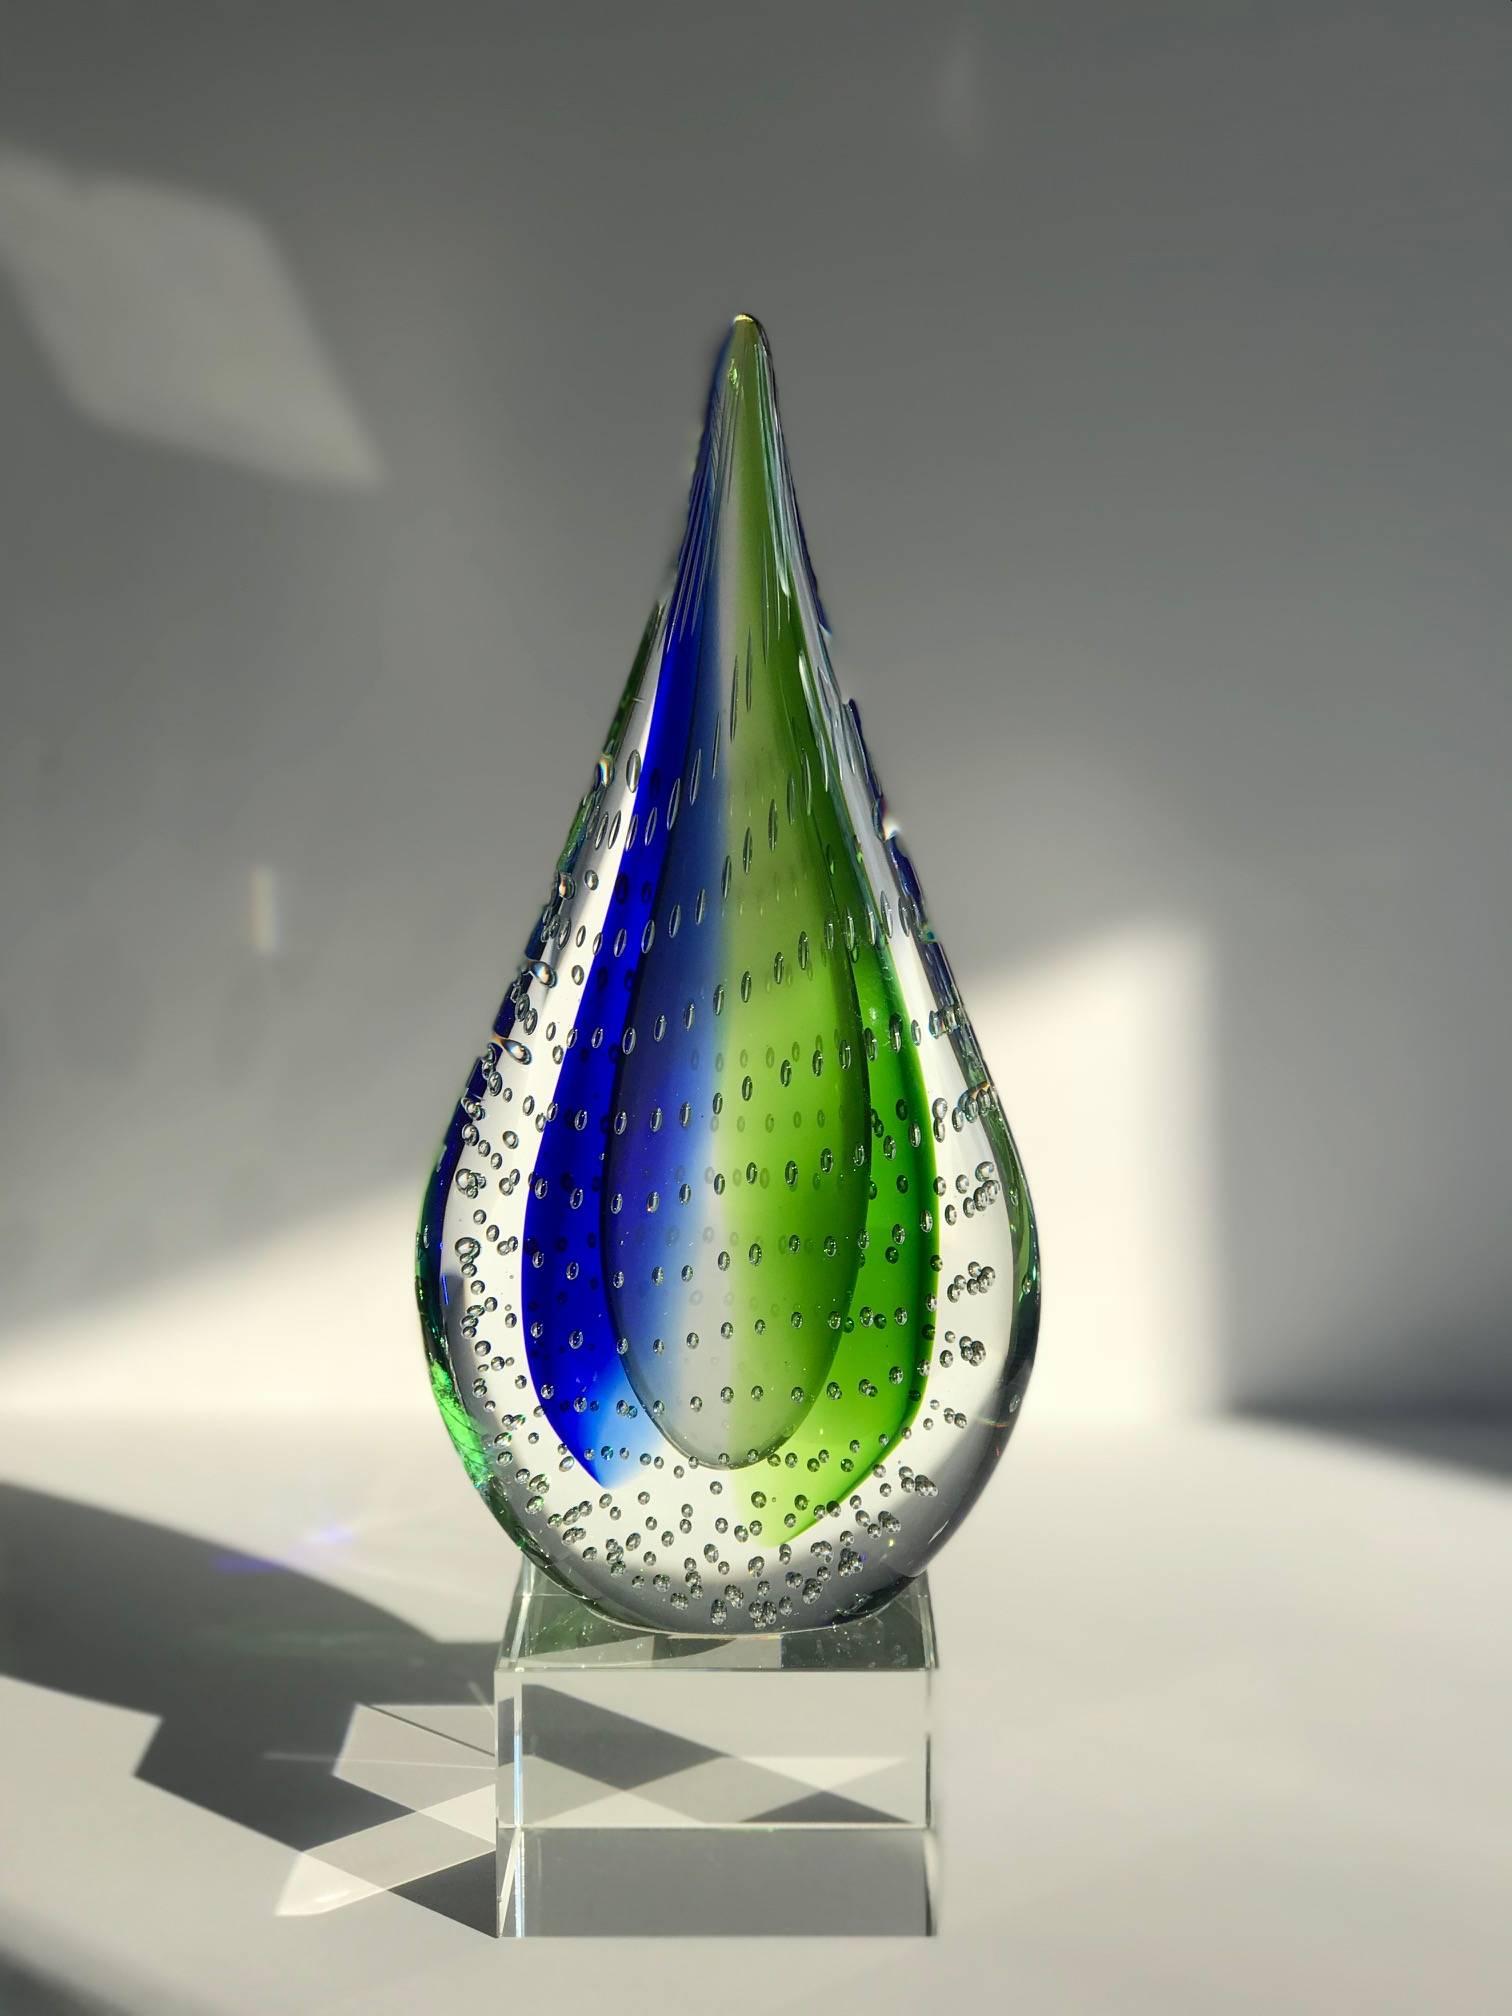 Mid-Century Modern Murano glass sculpture in the form of a teardrop. Features Sommerso techinque with bubble details in vibrant hues of blue, green, and clear glass.  Features a lucite base and can be used as decorative object, a bookend, or as